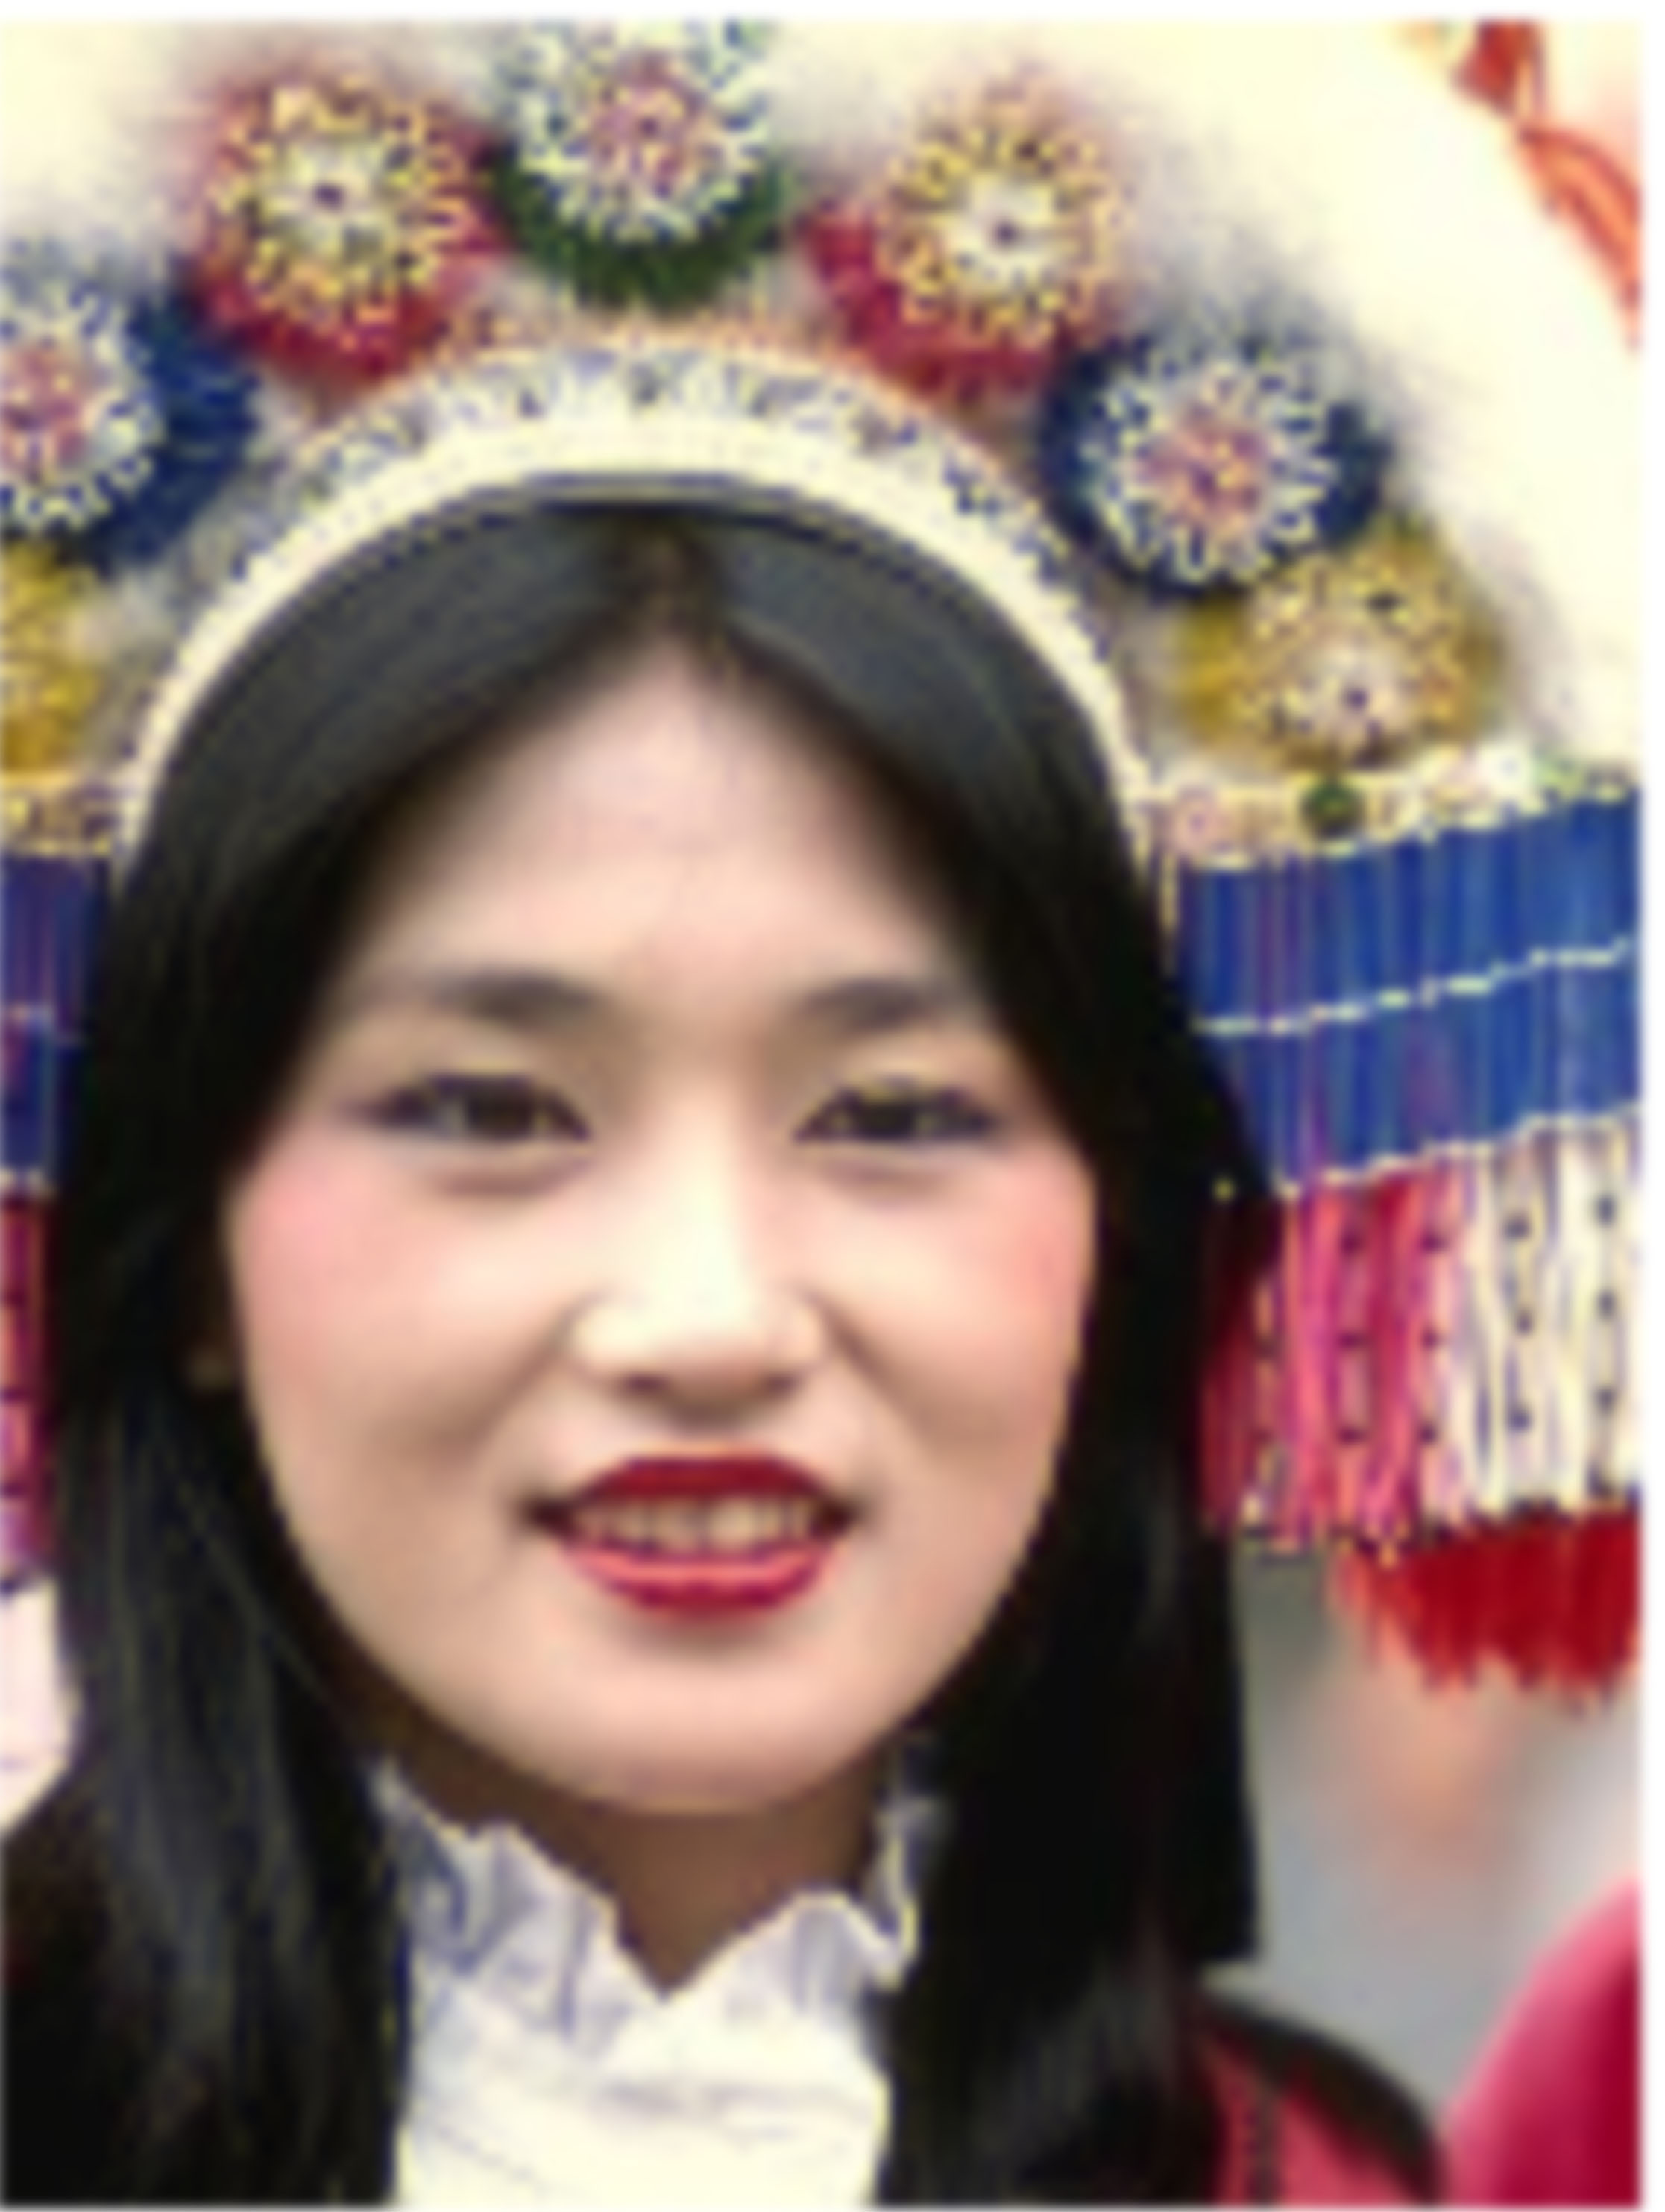 An image of a Chinese girl at a celebration